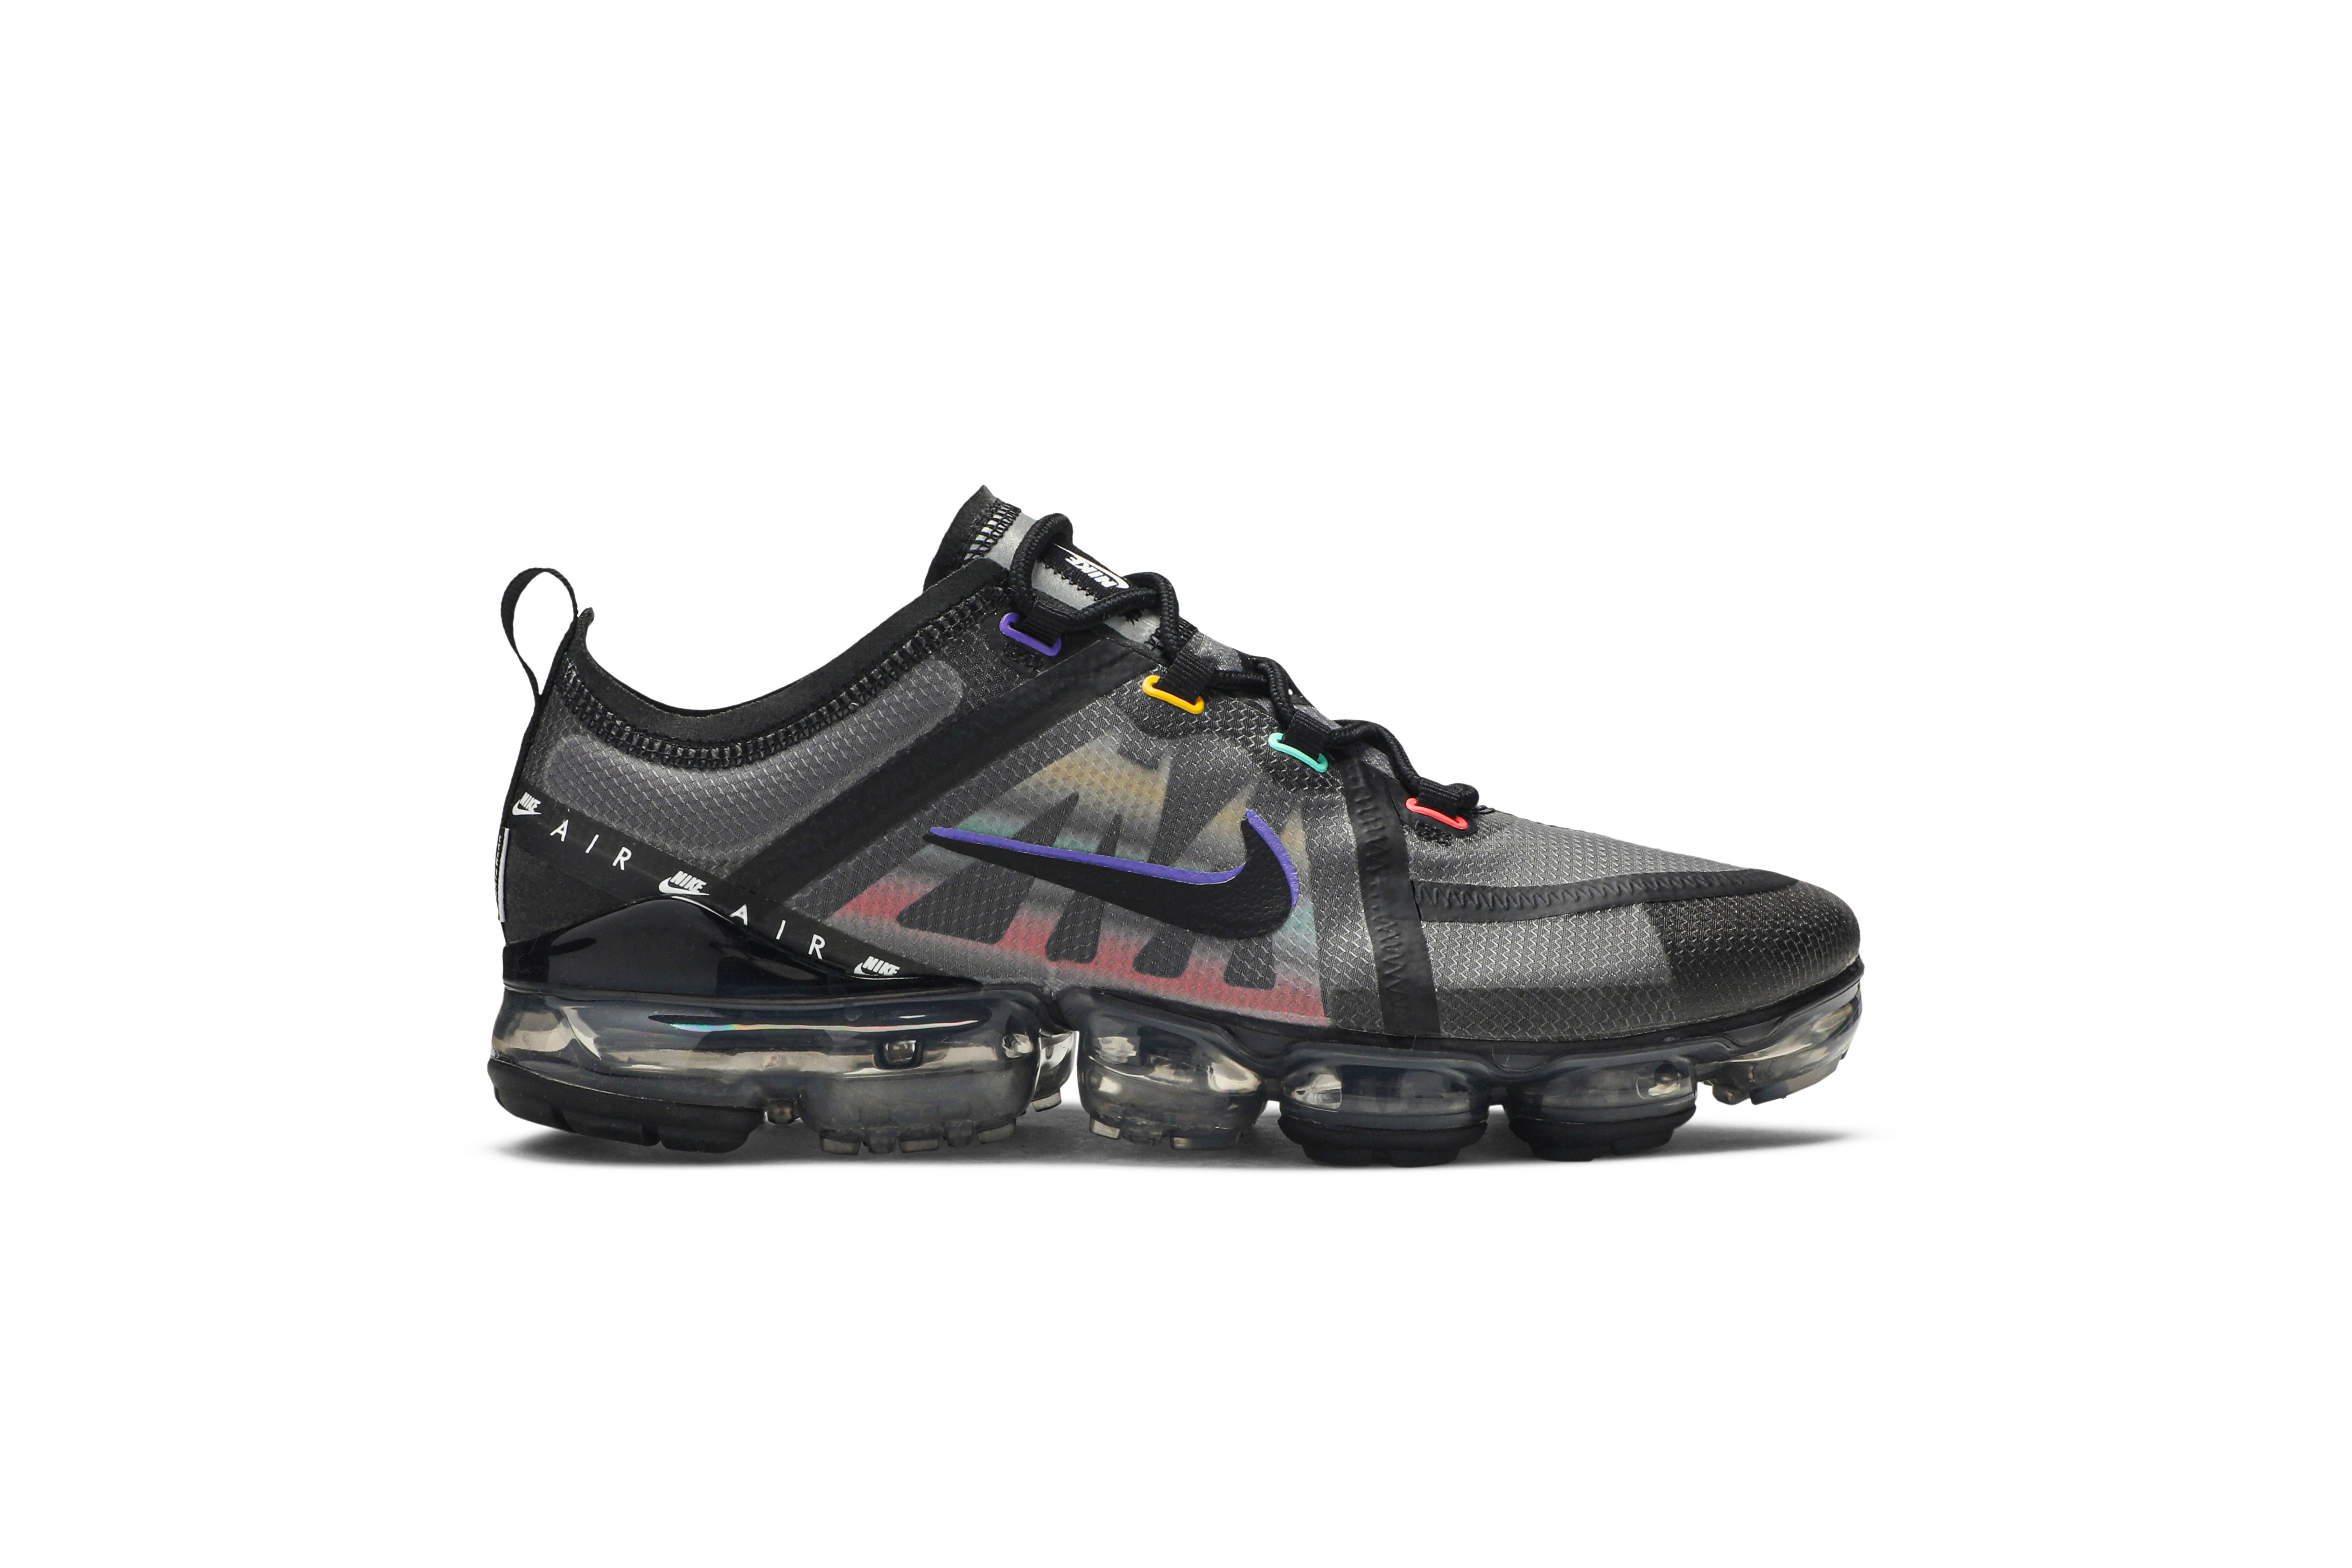 Nike Rubber Air Vapormax Trainers in Black for Men - Save 79% - Lyst